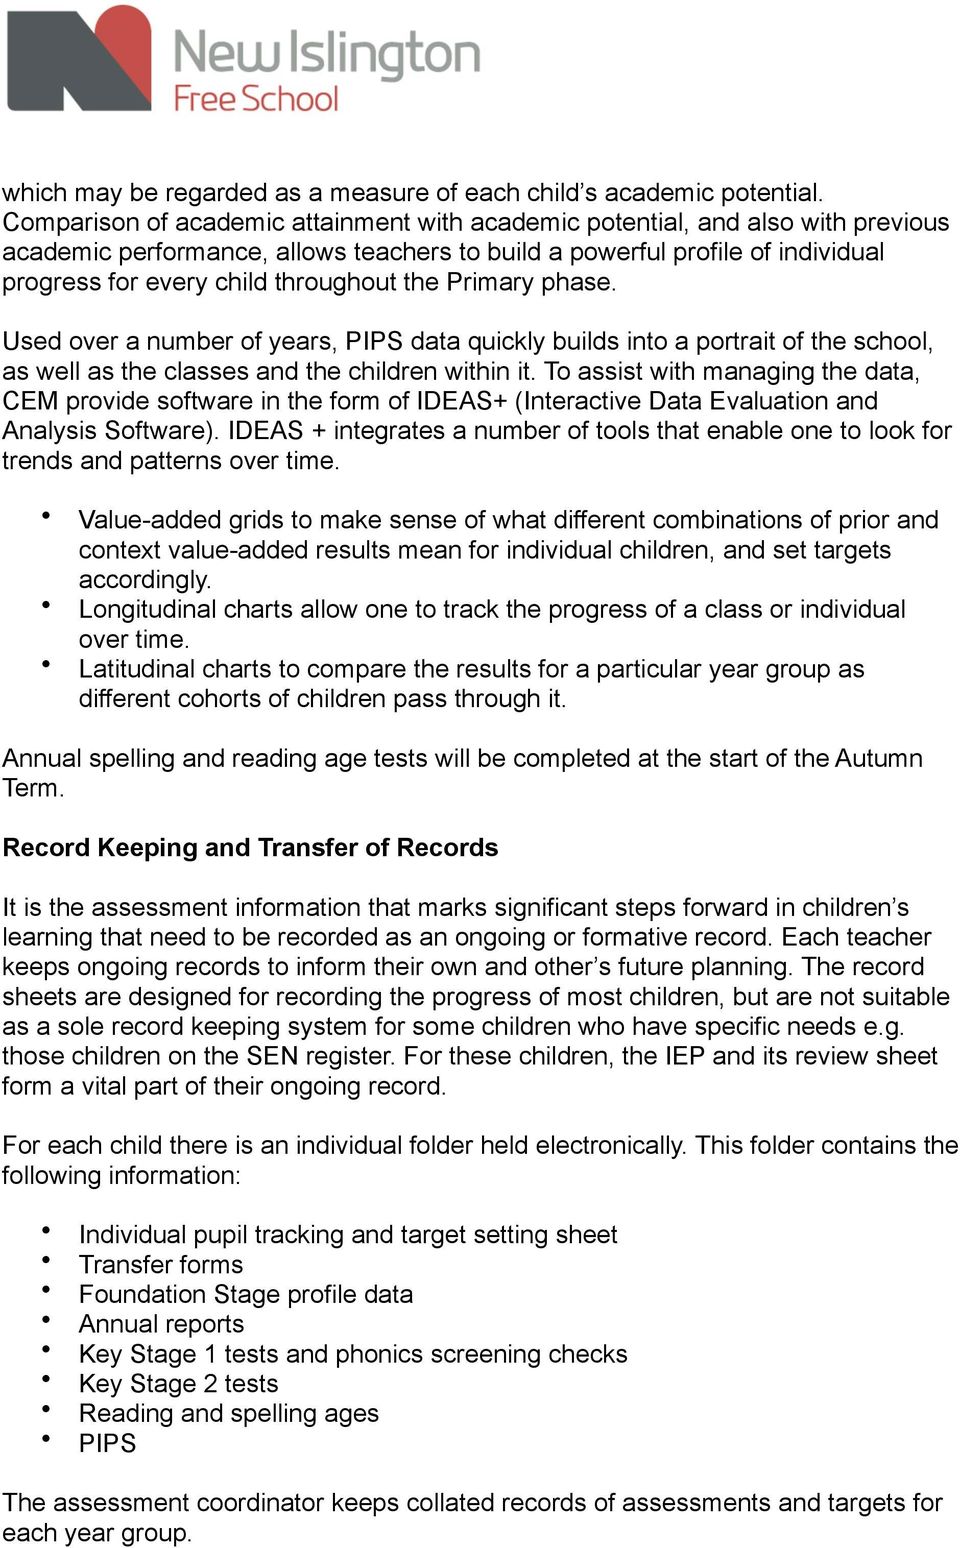 the Primary phase. Used over a number of years, PIPS data quickly builds into a portrait of the school, as well as the classes and the children within it.